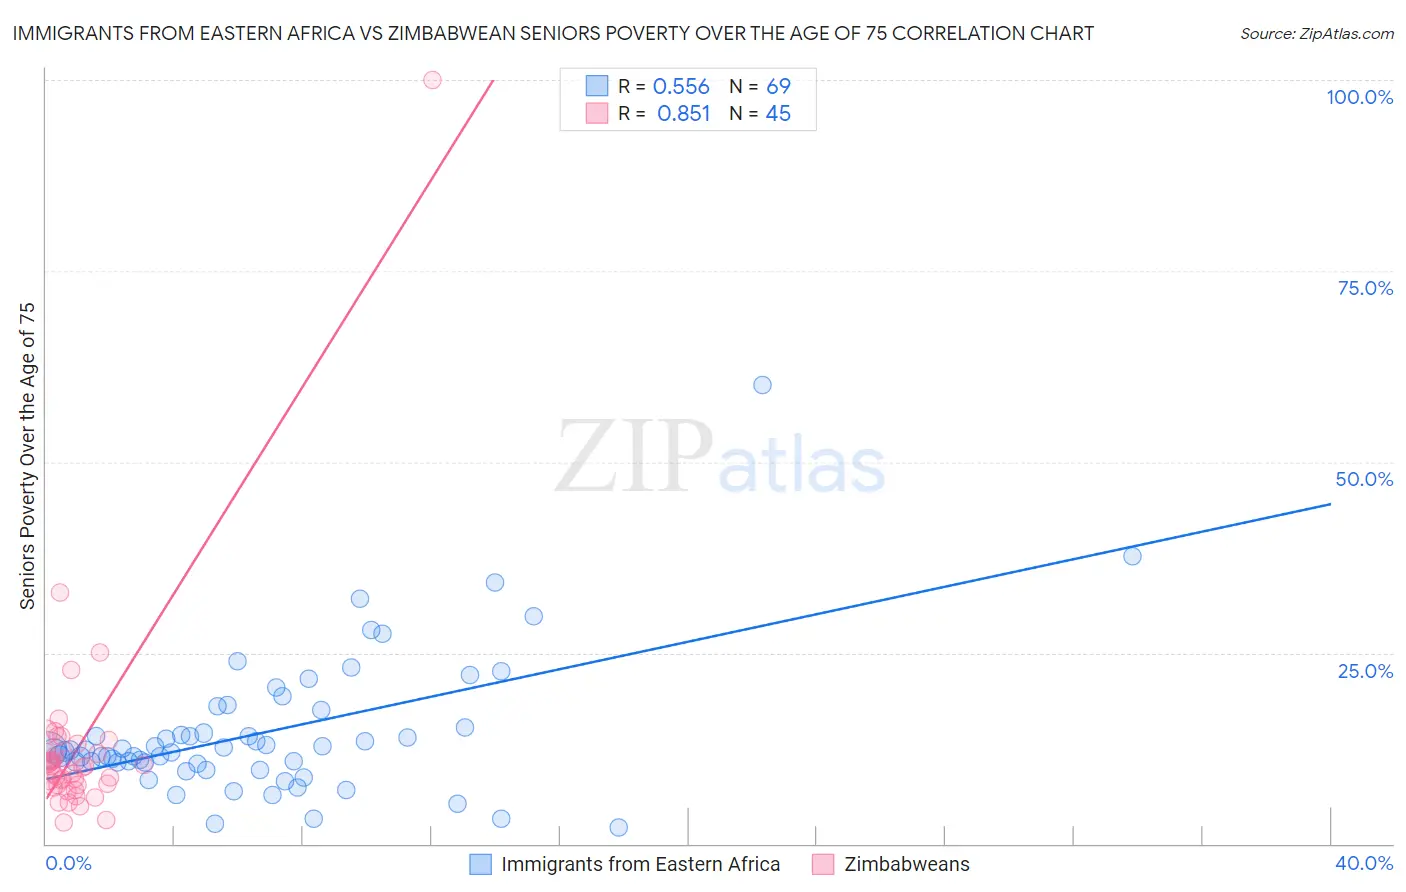 Immigrants from Eastern Africa vs Zimbabwean Seniors Poverty Over the Age of 75